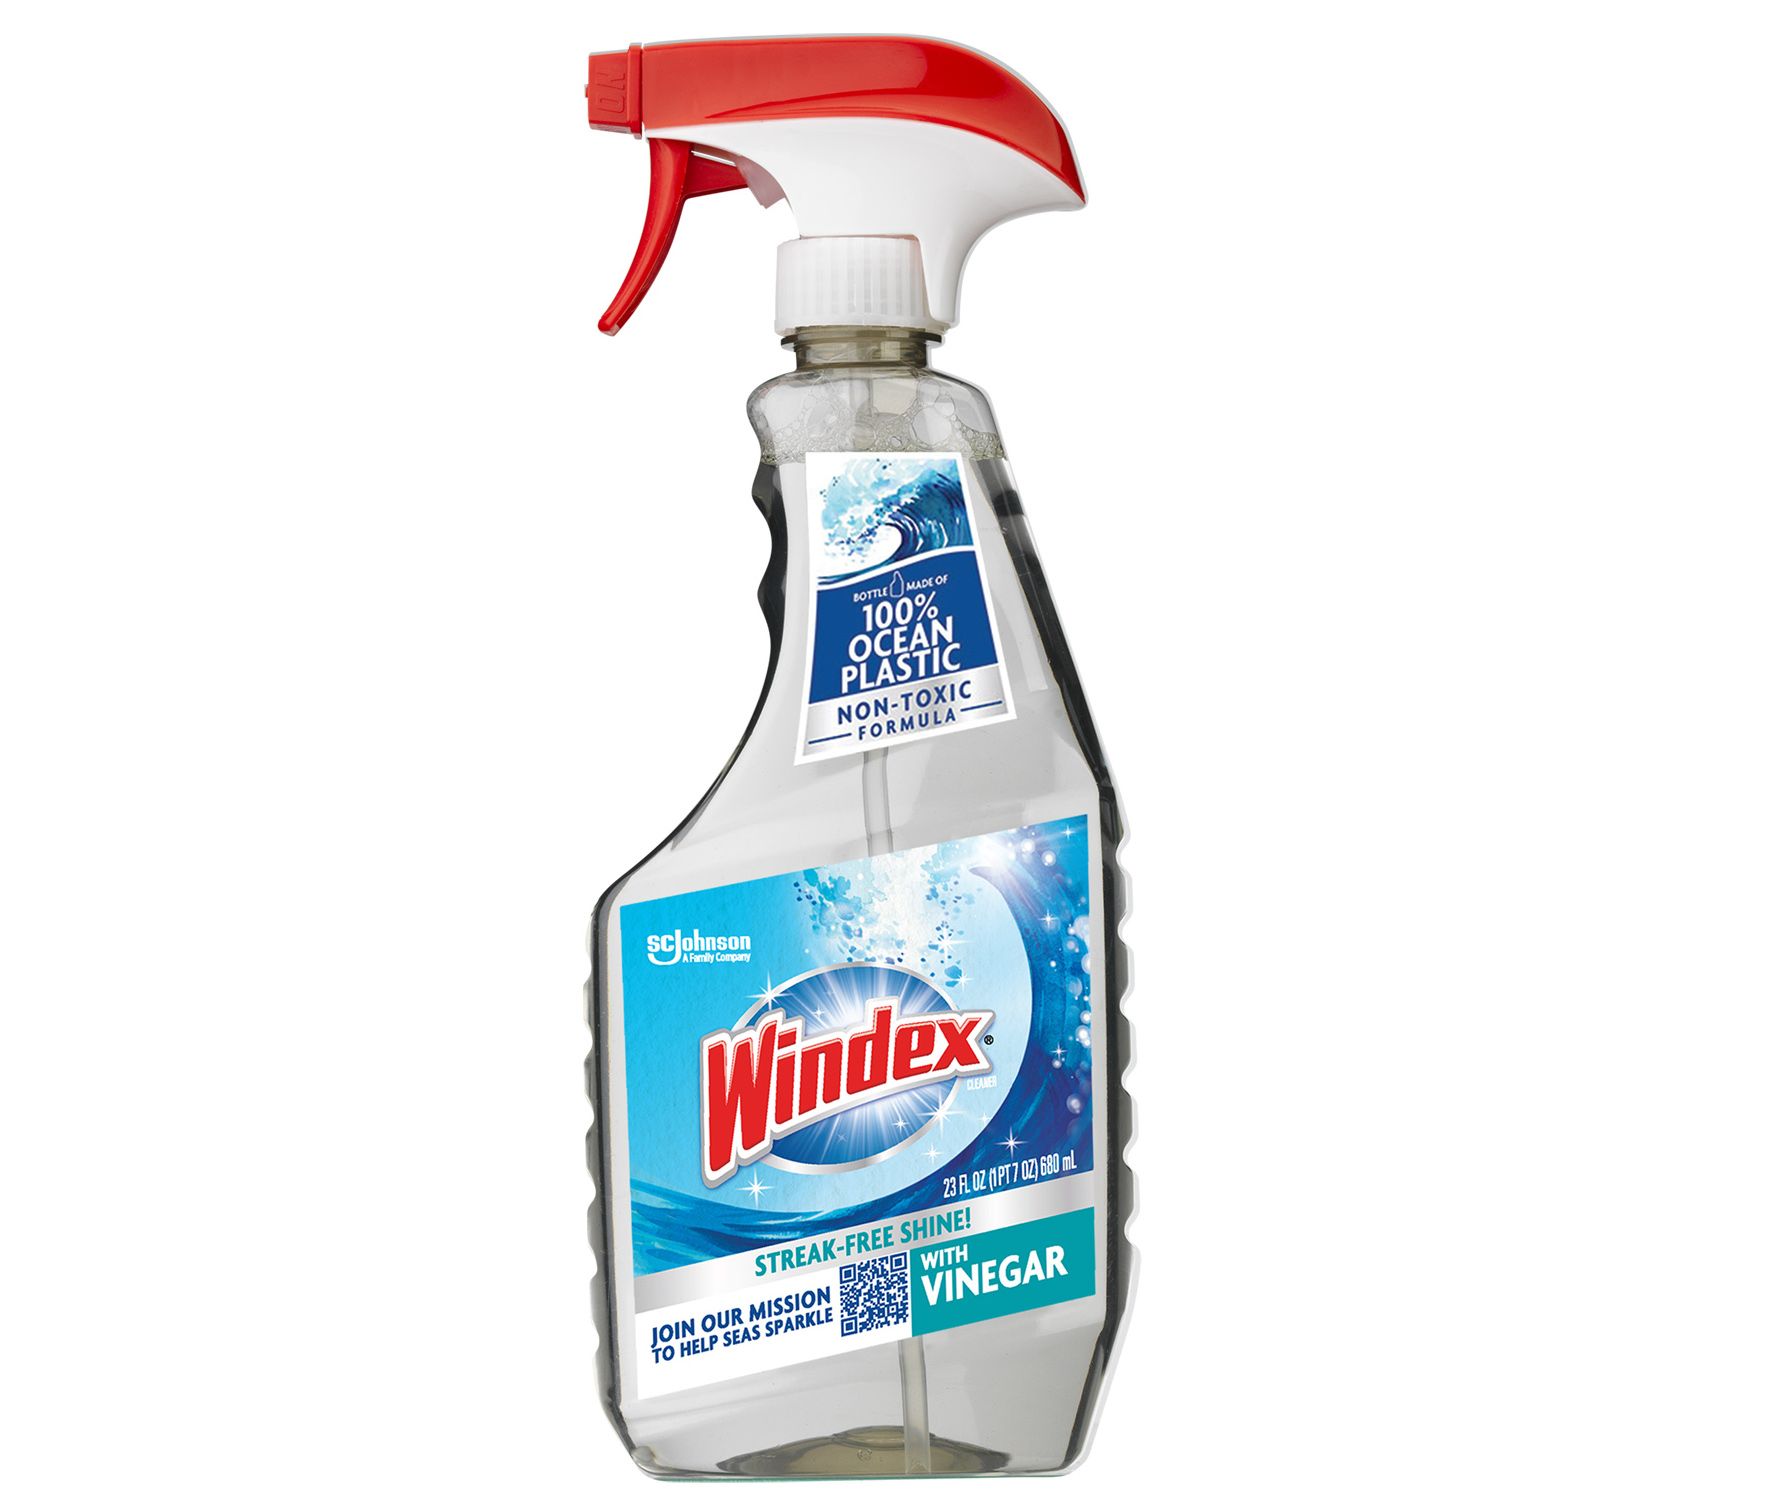 Windex Class Action Alleges 'Non-Toxic' Label - Top Class Actions